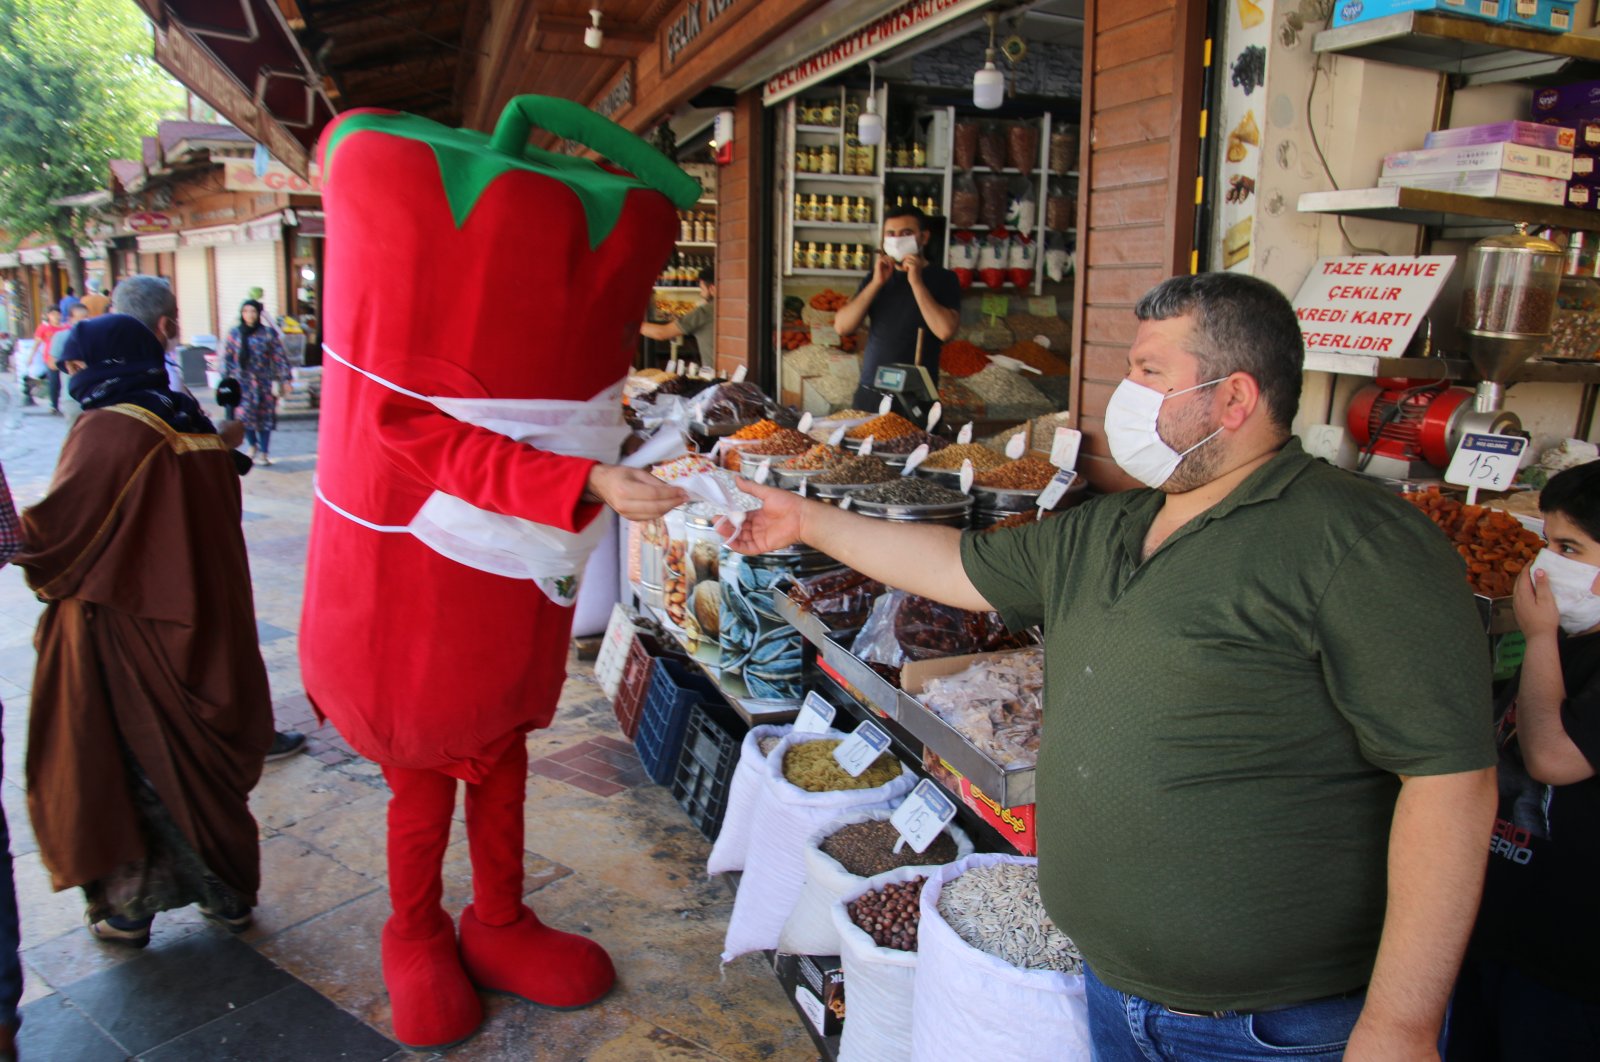 Dressed up as giant isot peppers, mascots distribute free masks to businesses and shop owners in Şanlıurfa, July 13, 2020. (AA Photo)